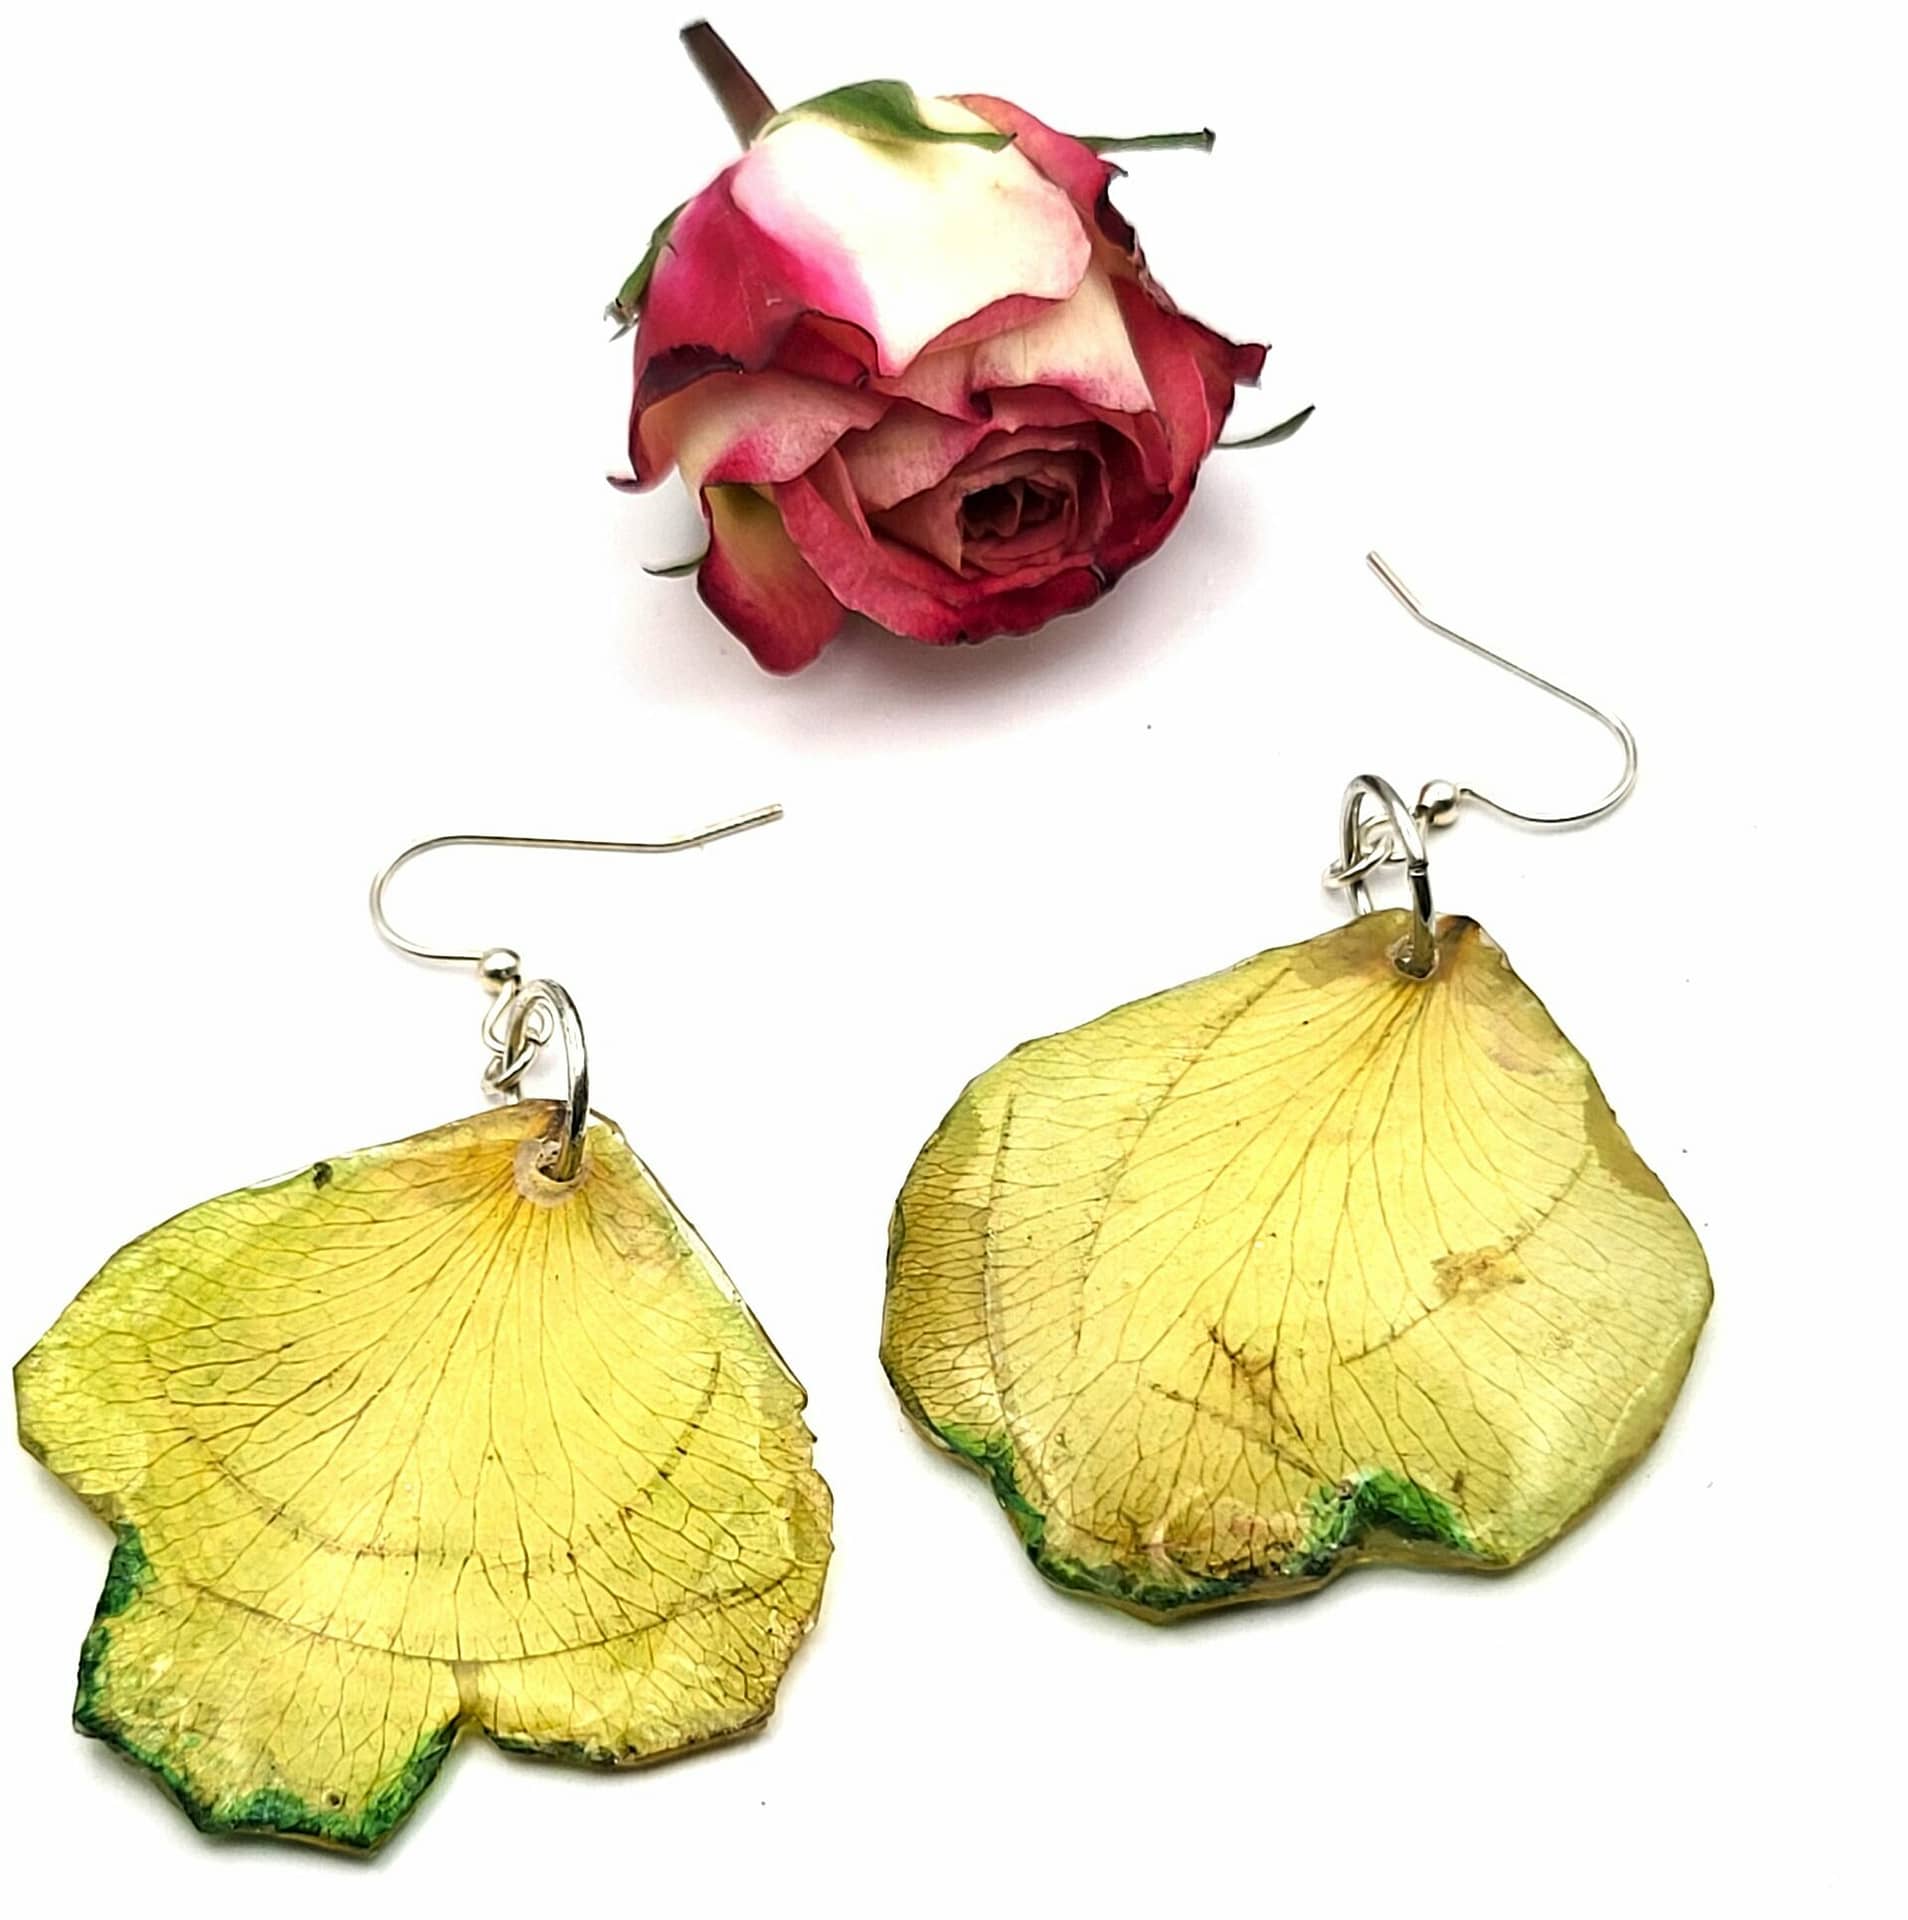 Blush Of The Rose Petal Earrings - Resin Art And Recommendations